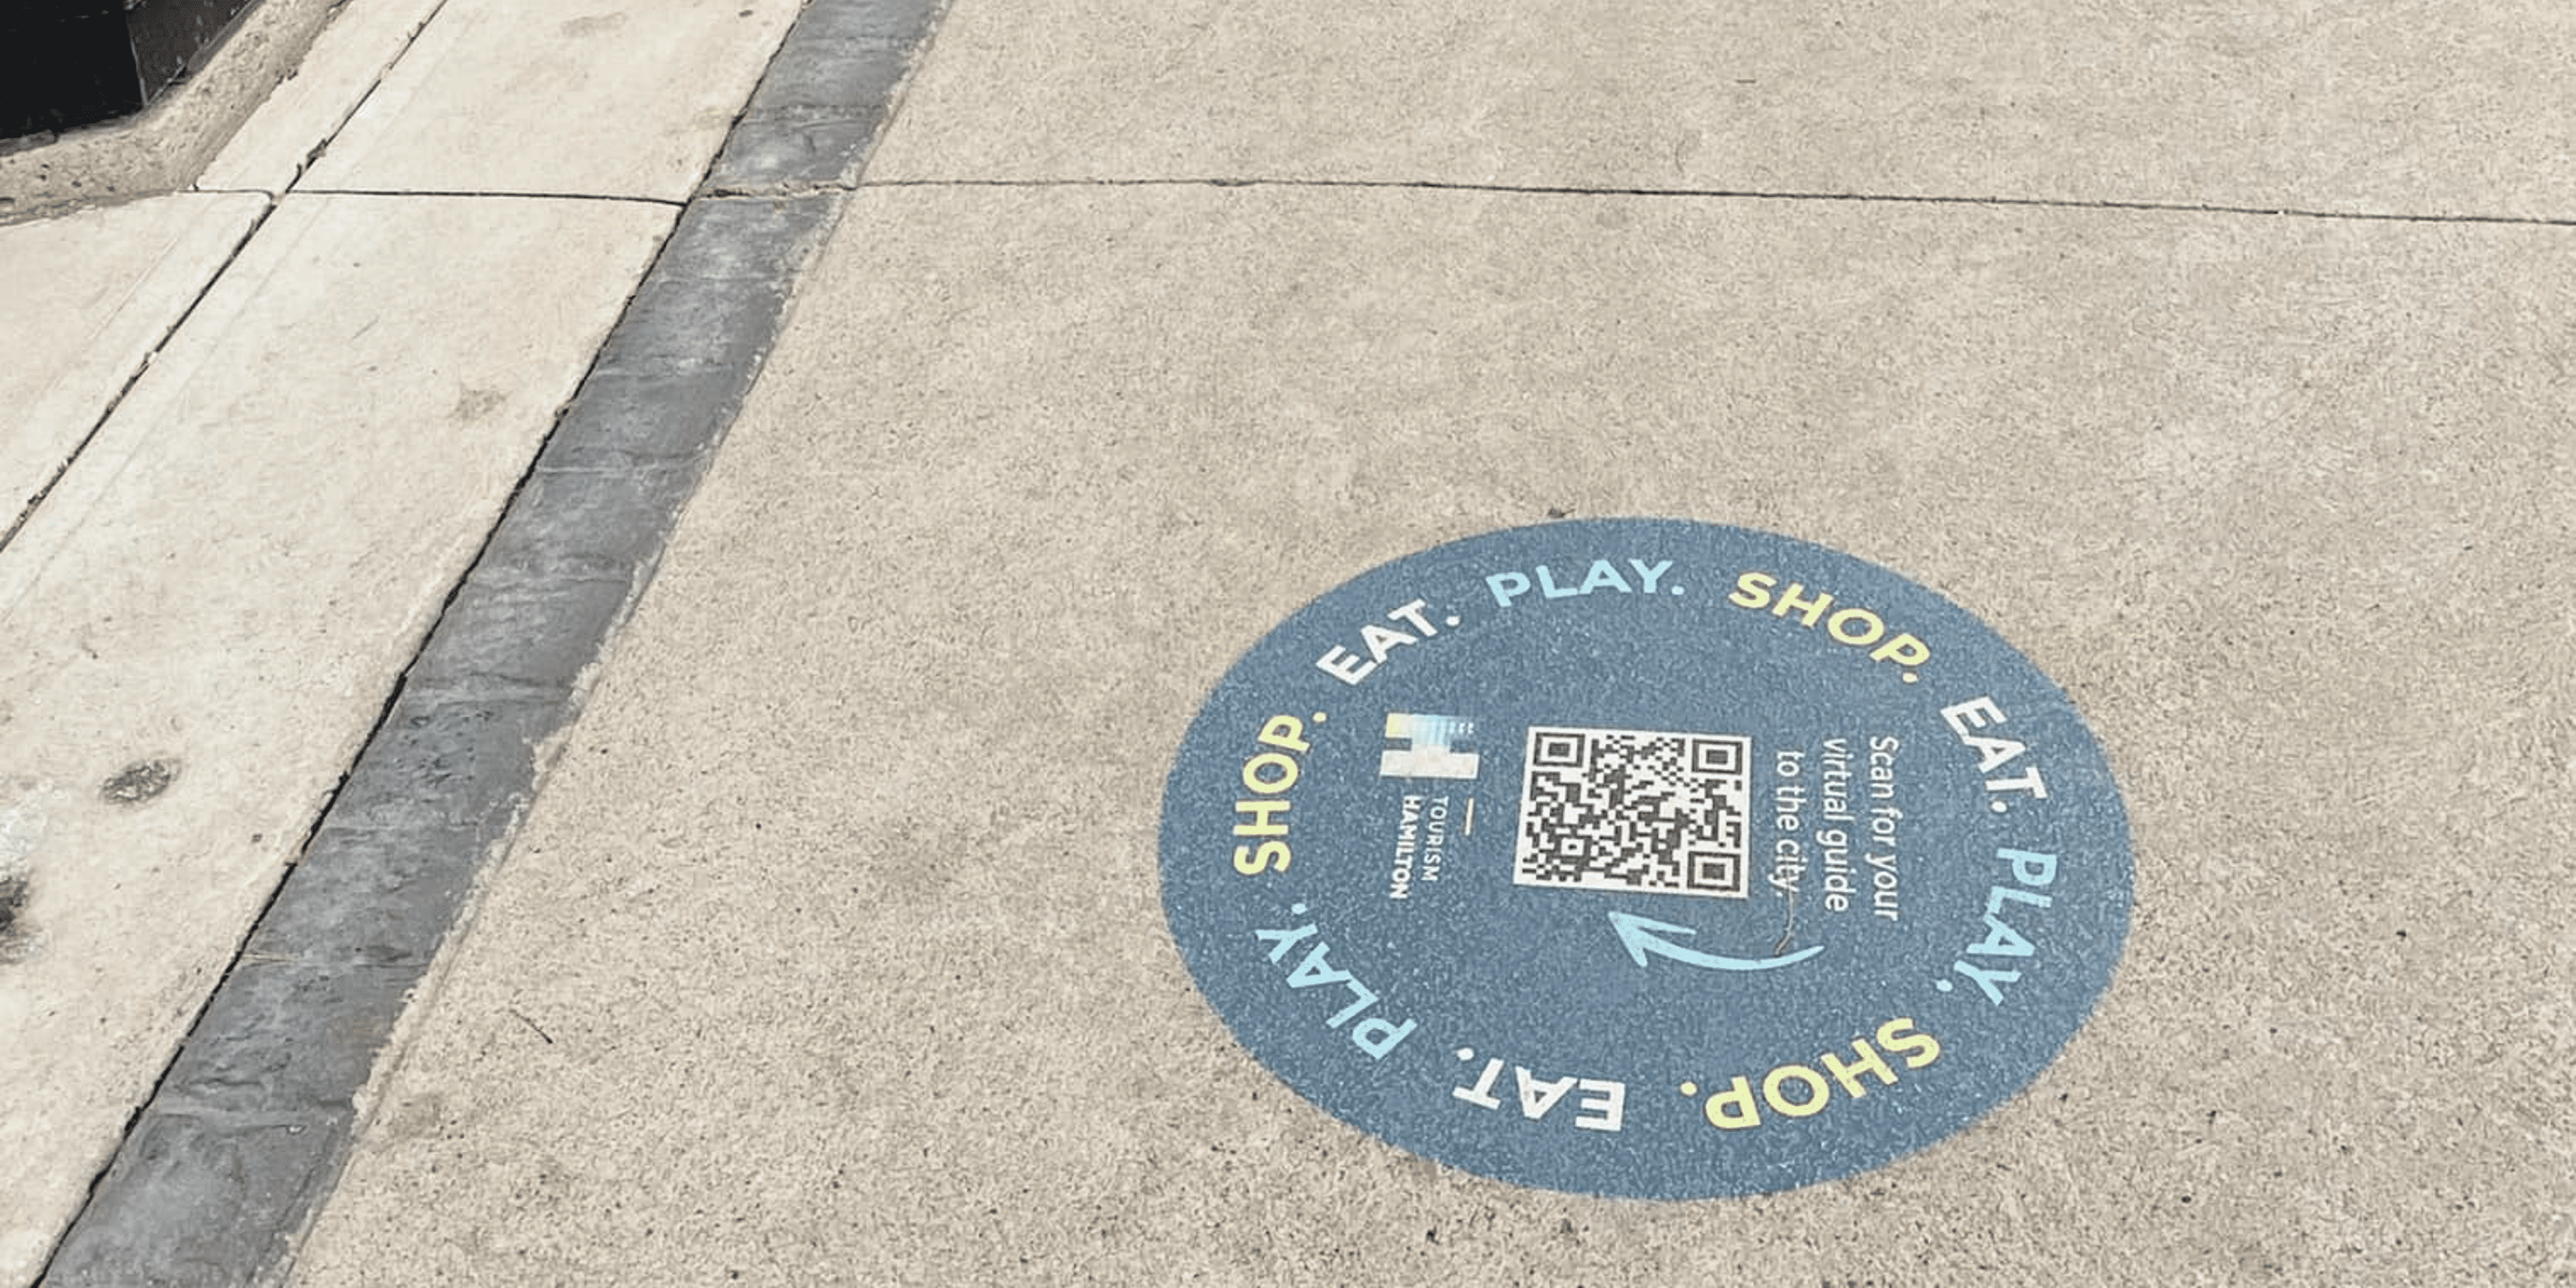 Have you noticed QR codes on Hamilton sidewalks? Here's what they do